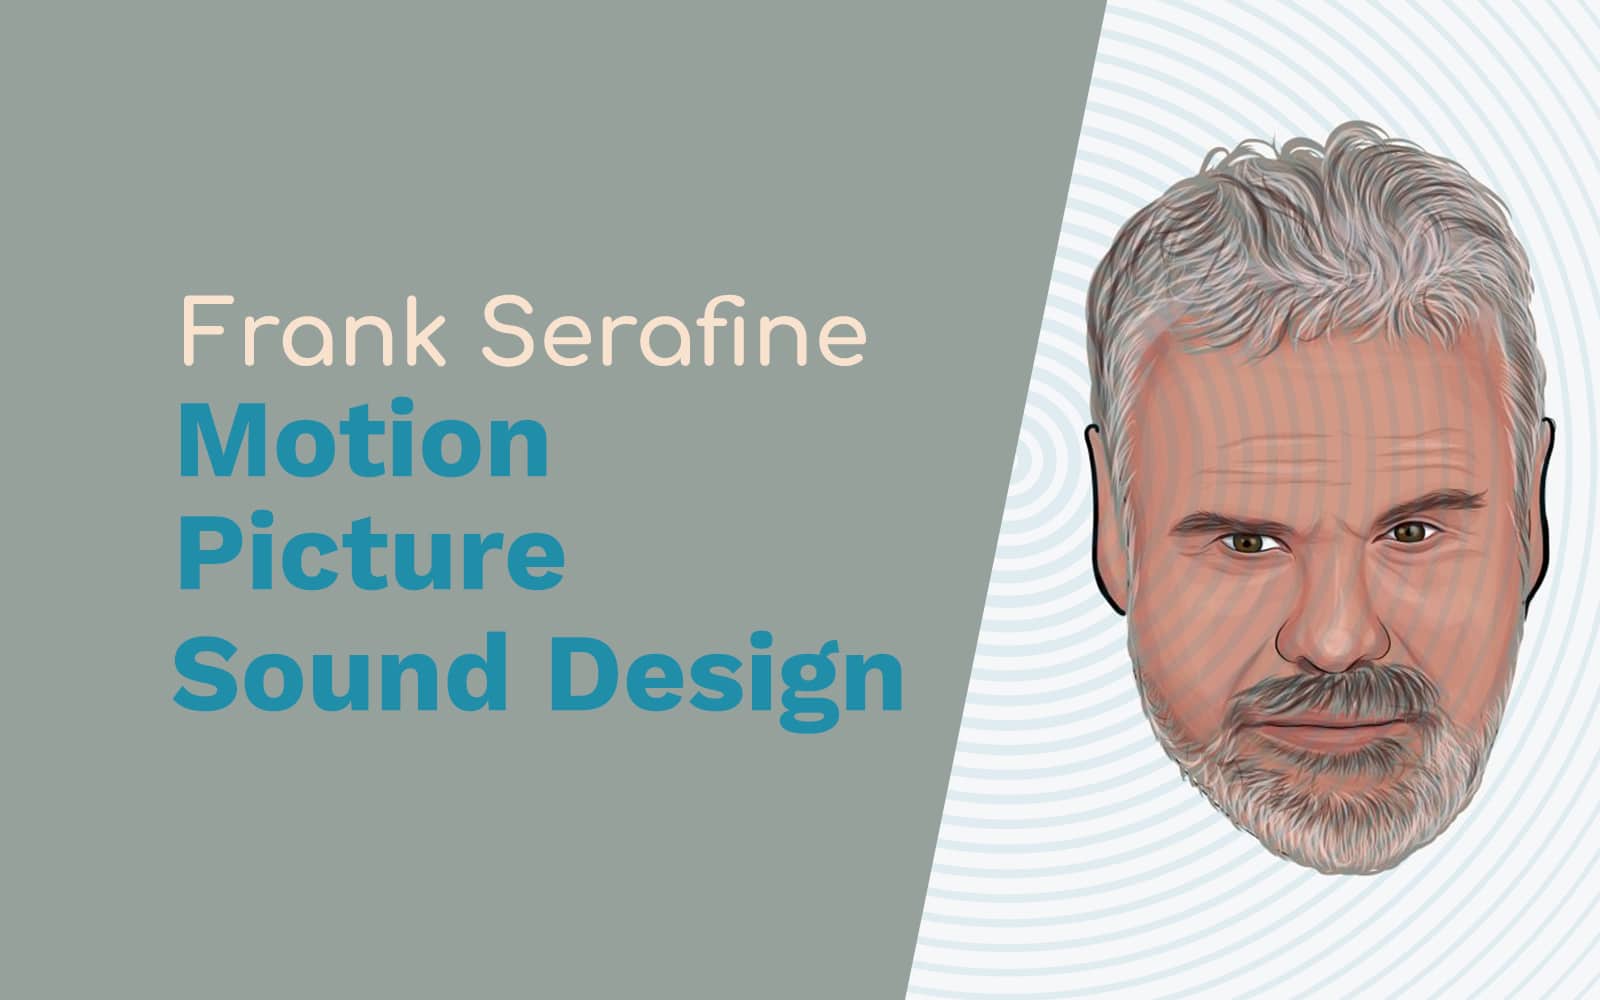 Frank Serafine: Motion Picture Sound Design, Synthesizers and Sound Effects Adobe Audition Podcast  Music Radio Creative